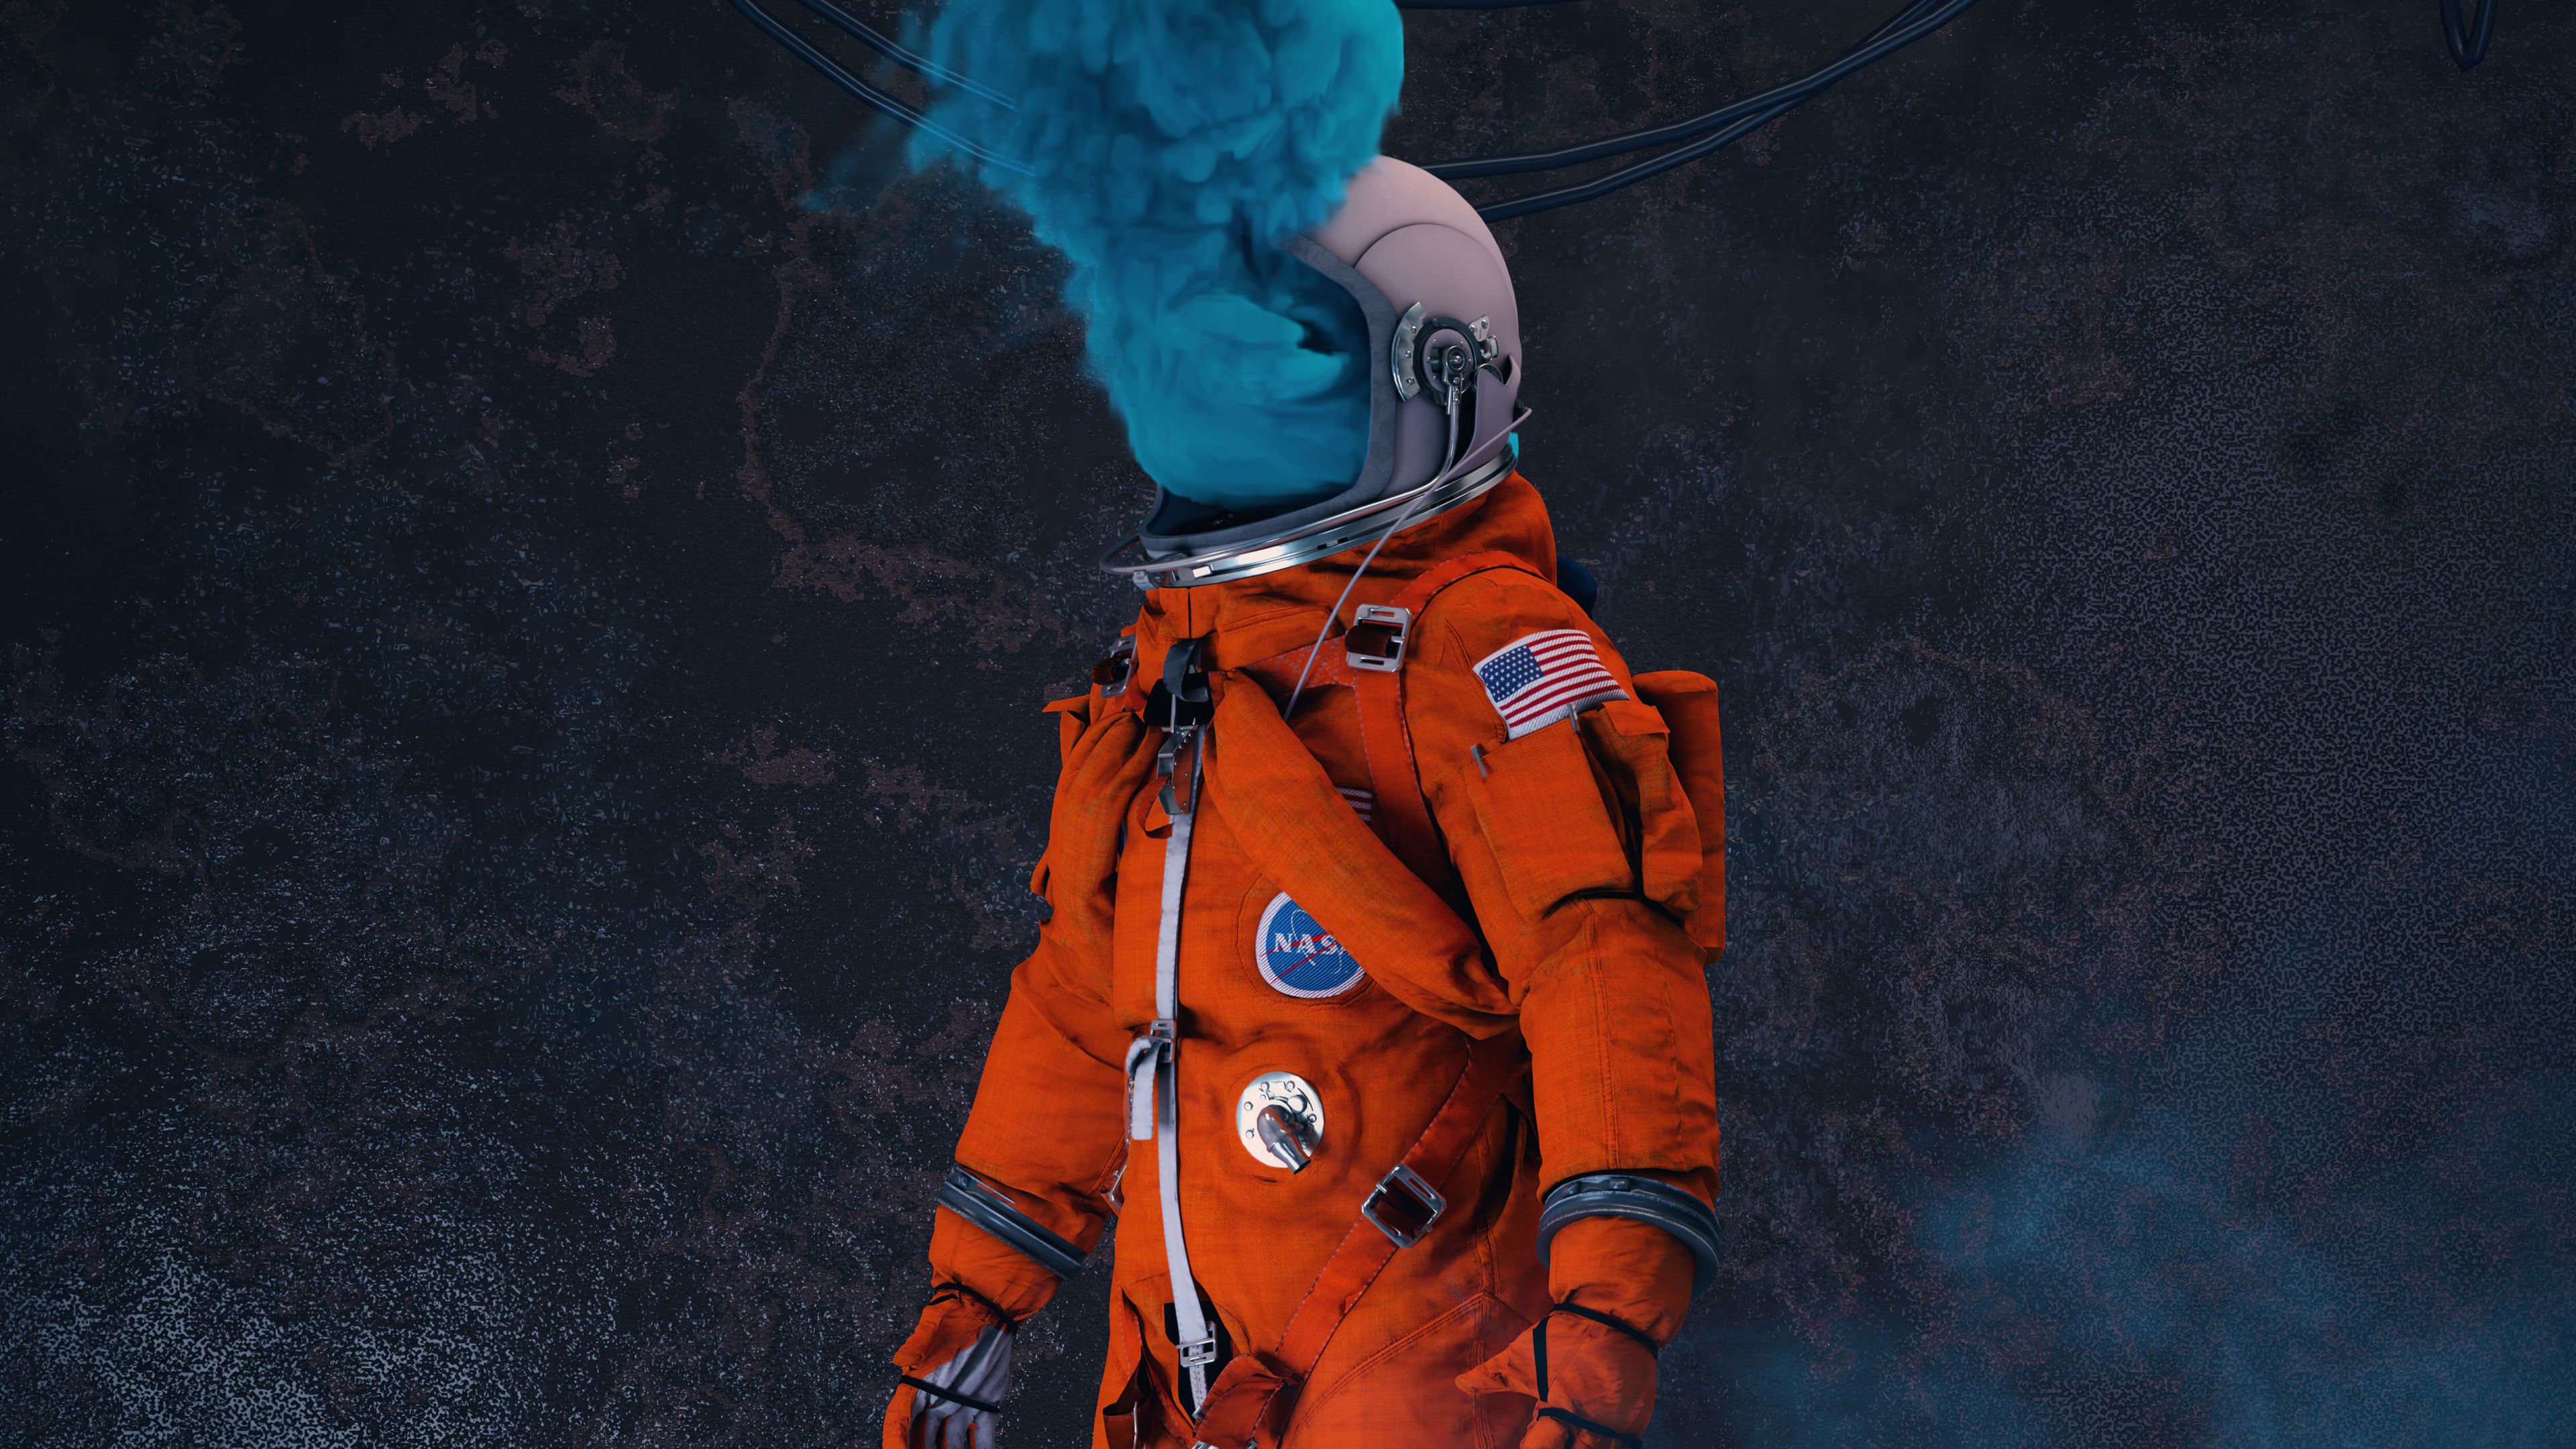 Astronaut Nasa Take Me Away 4k, HD Artist, 4k Wallpaper, Image, Background, Photo and Picture